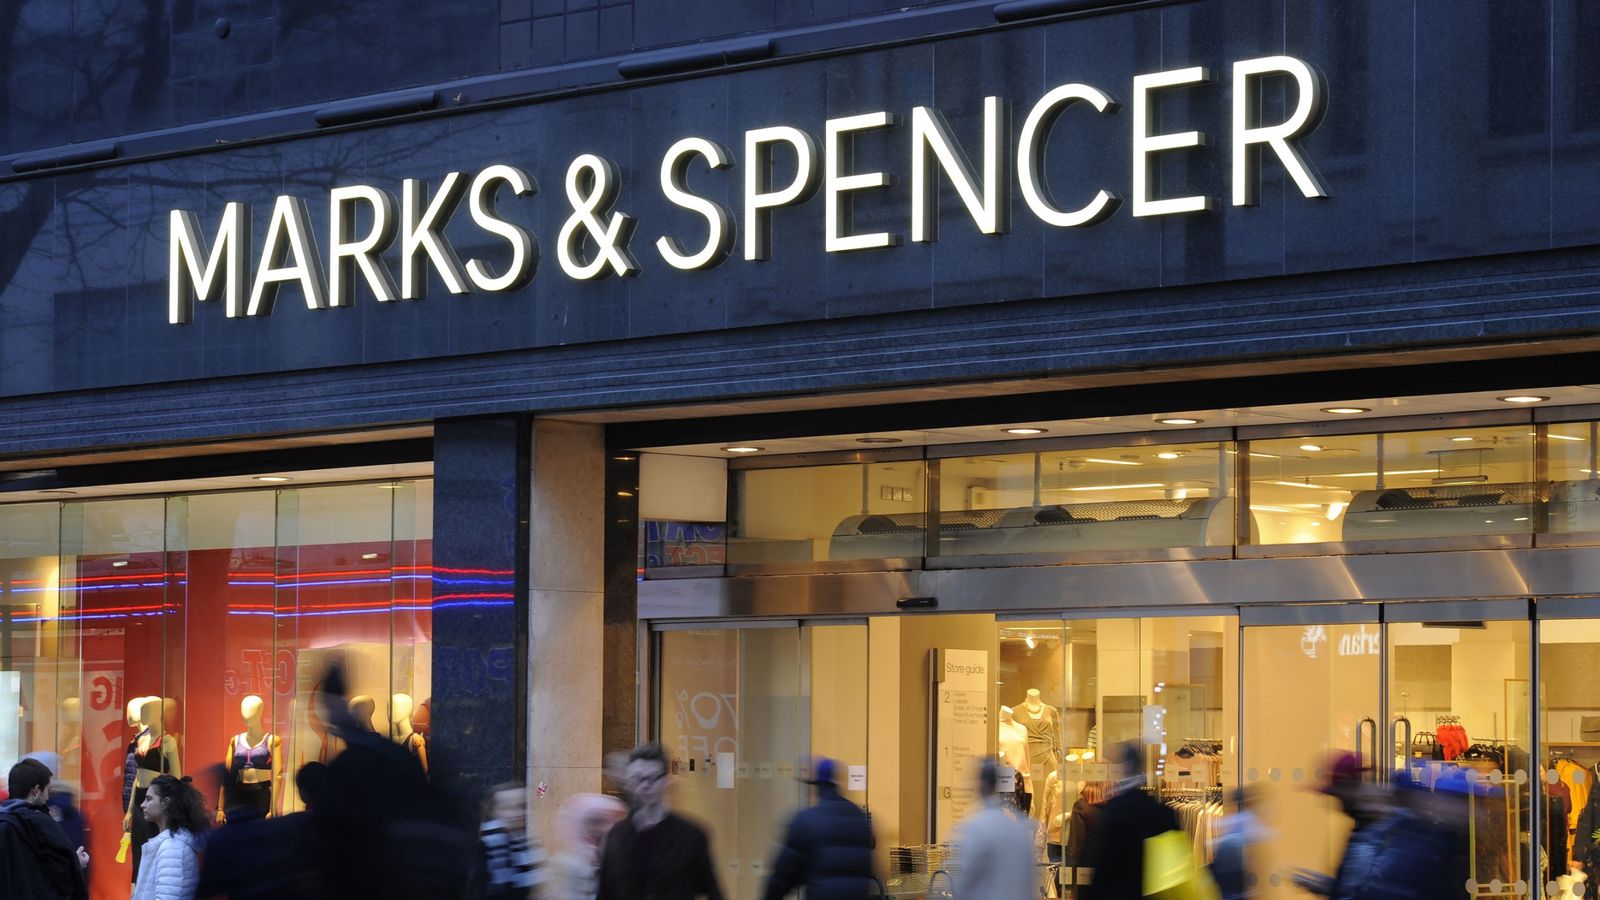 Marks & Spencer's new shops plan to create 3,400 jobs as part of £480m investment